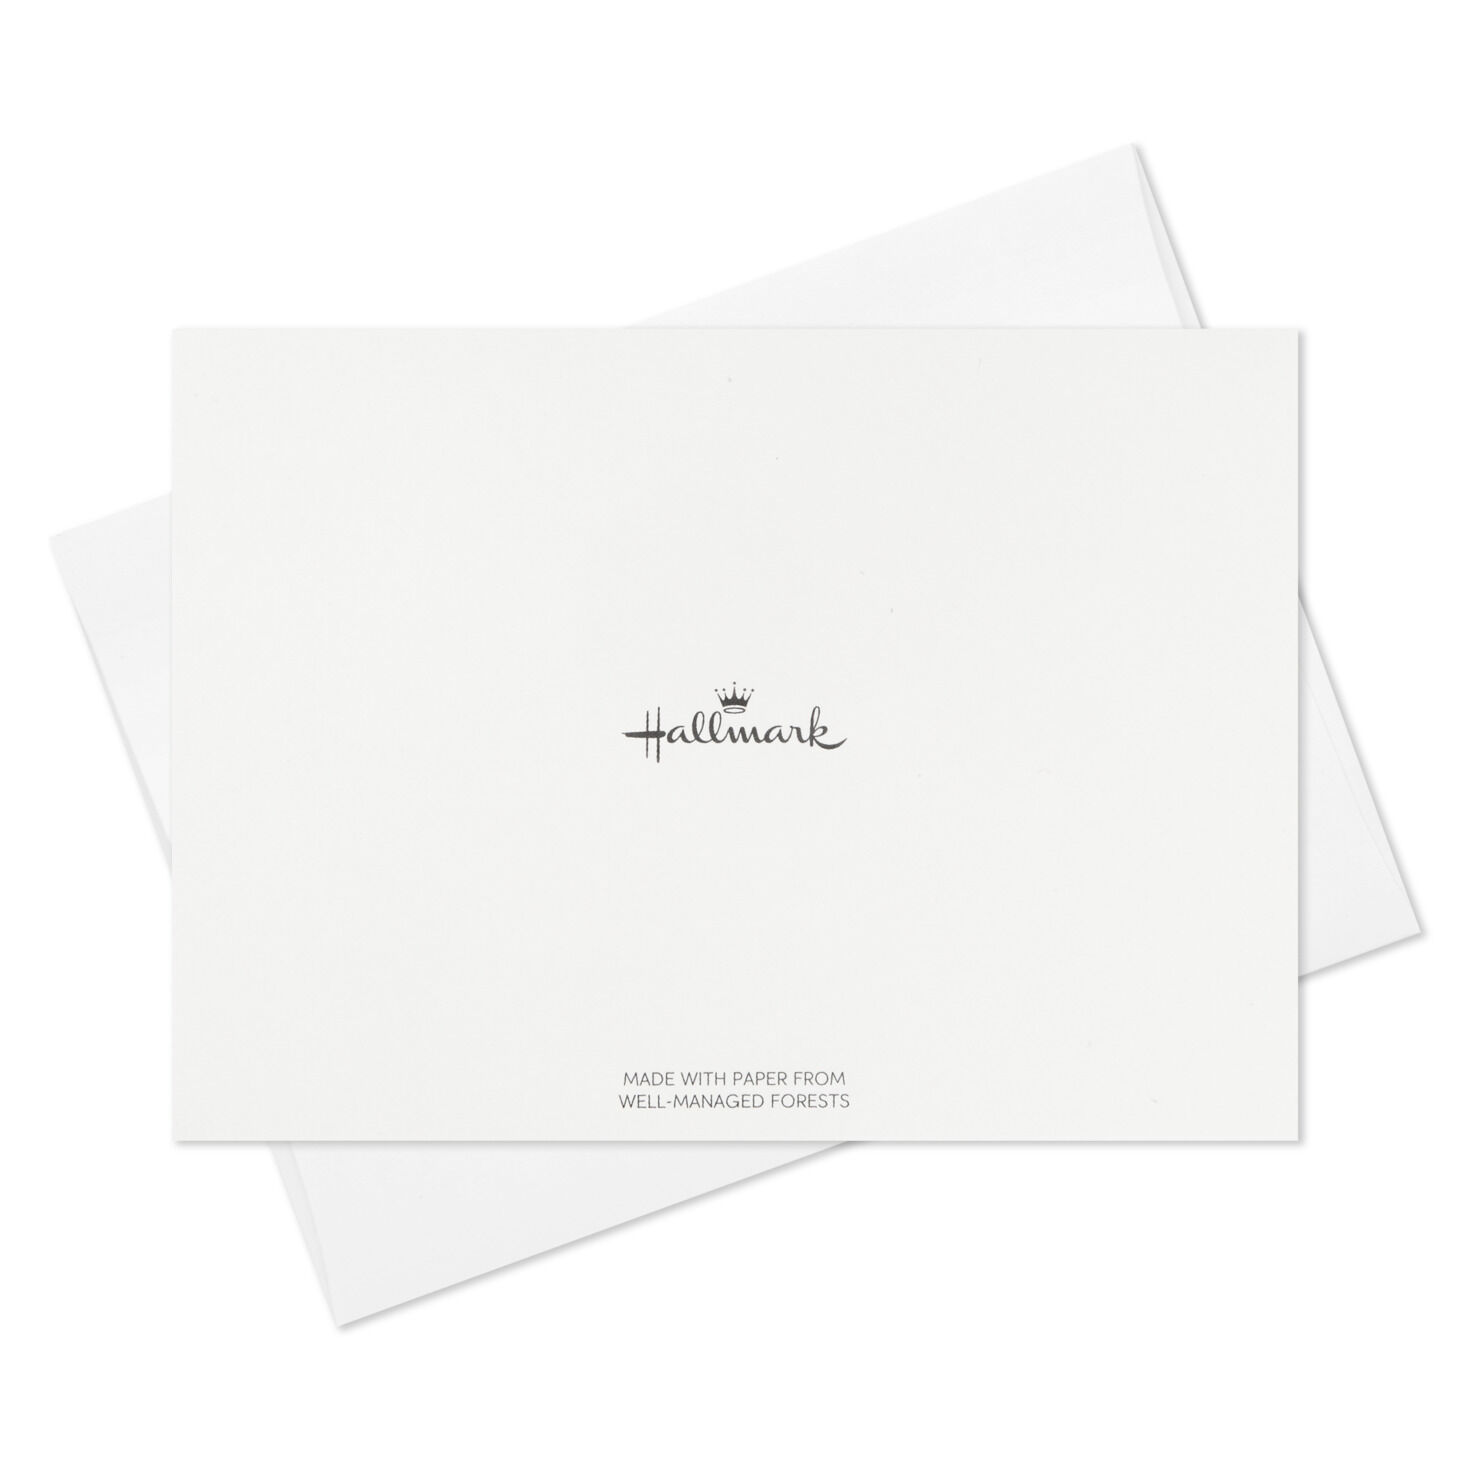 Gray With Gold Border Boxed Blank Thank-You Notes, Pack of 10 for only USD 9.99 | Hallmark